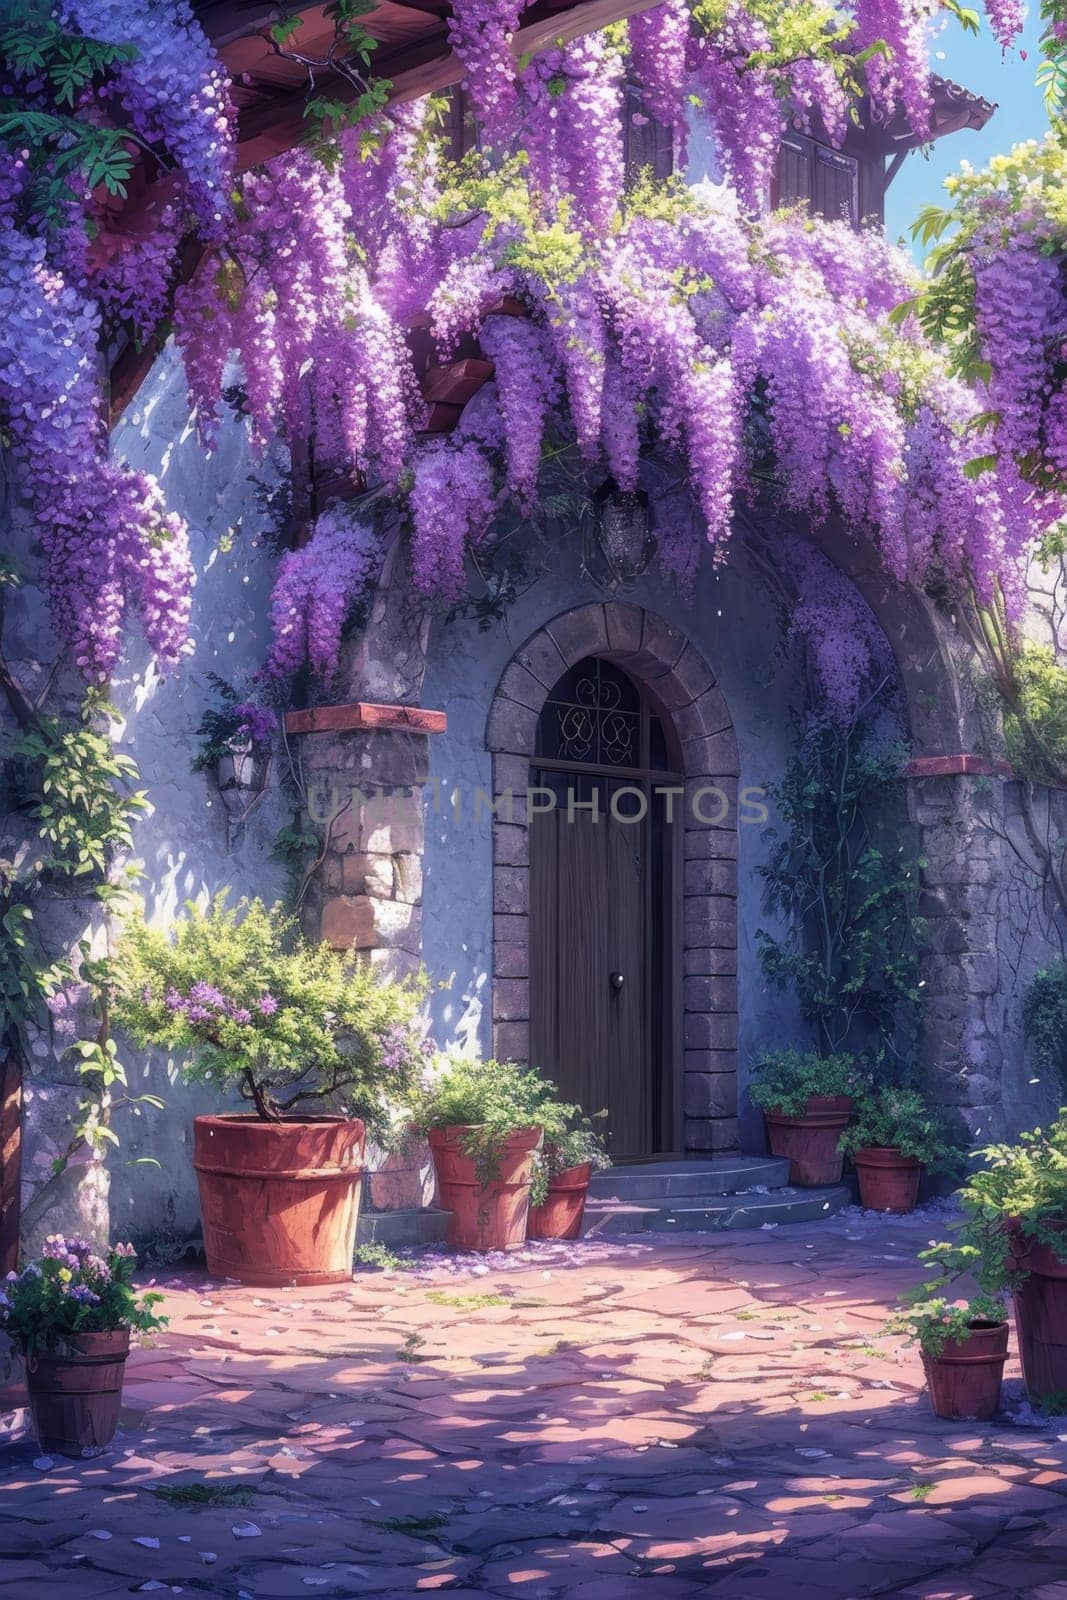 The Wisteria sinensis plant with lilac flowers decorates the entrance to the house. 3d illustration by Lobachad